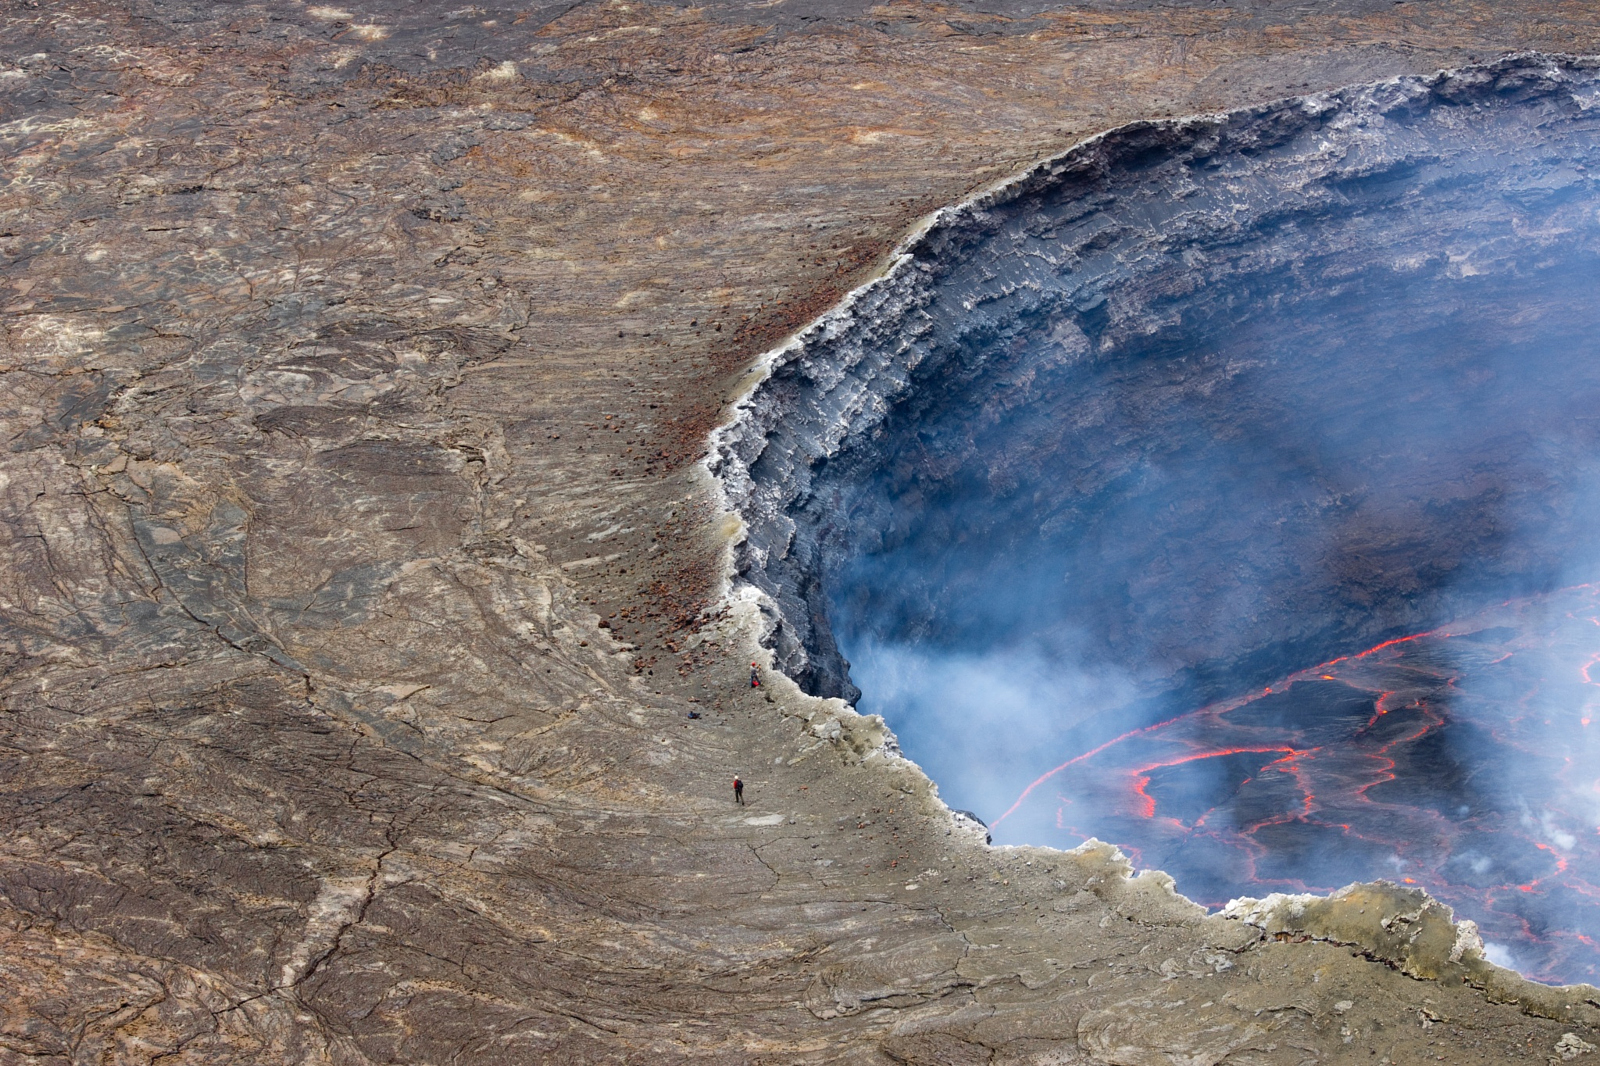 Incredible Photo of a Man On the Edge of the World's Largest Lava Lake